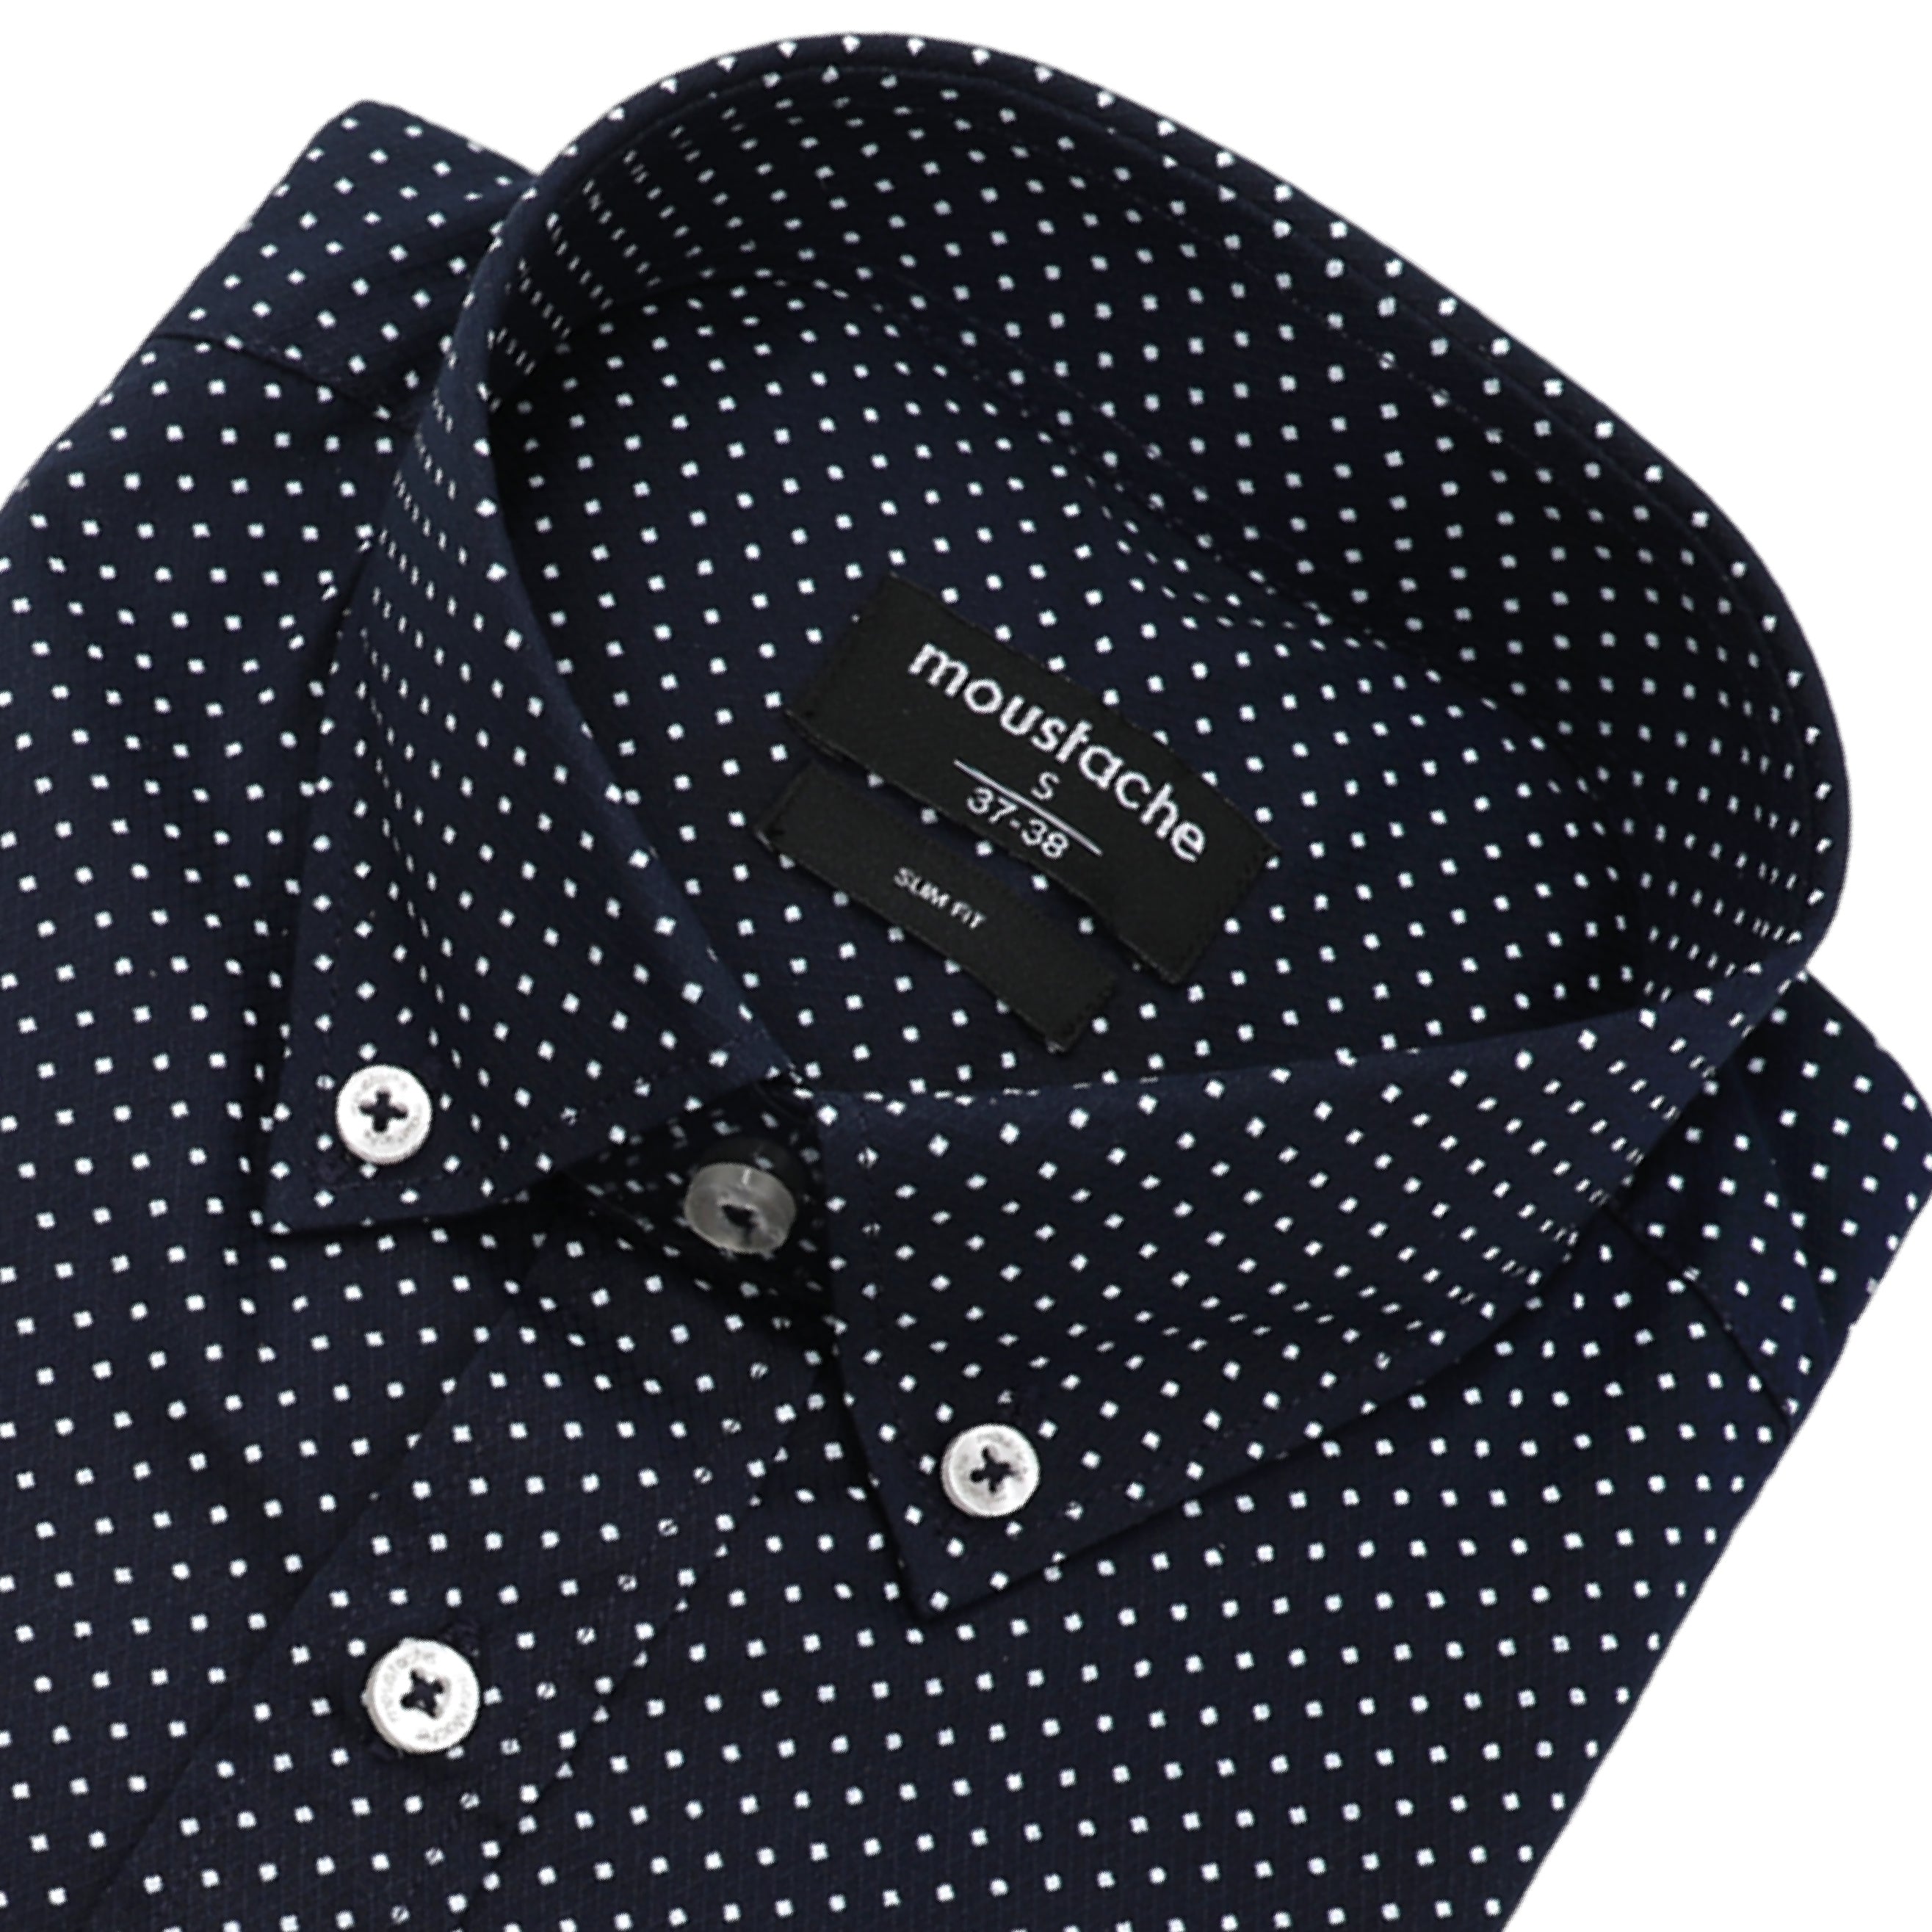 Men Navy Casual Shirt With White Pointed Design